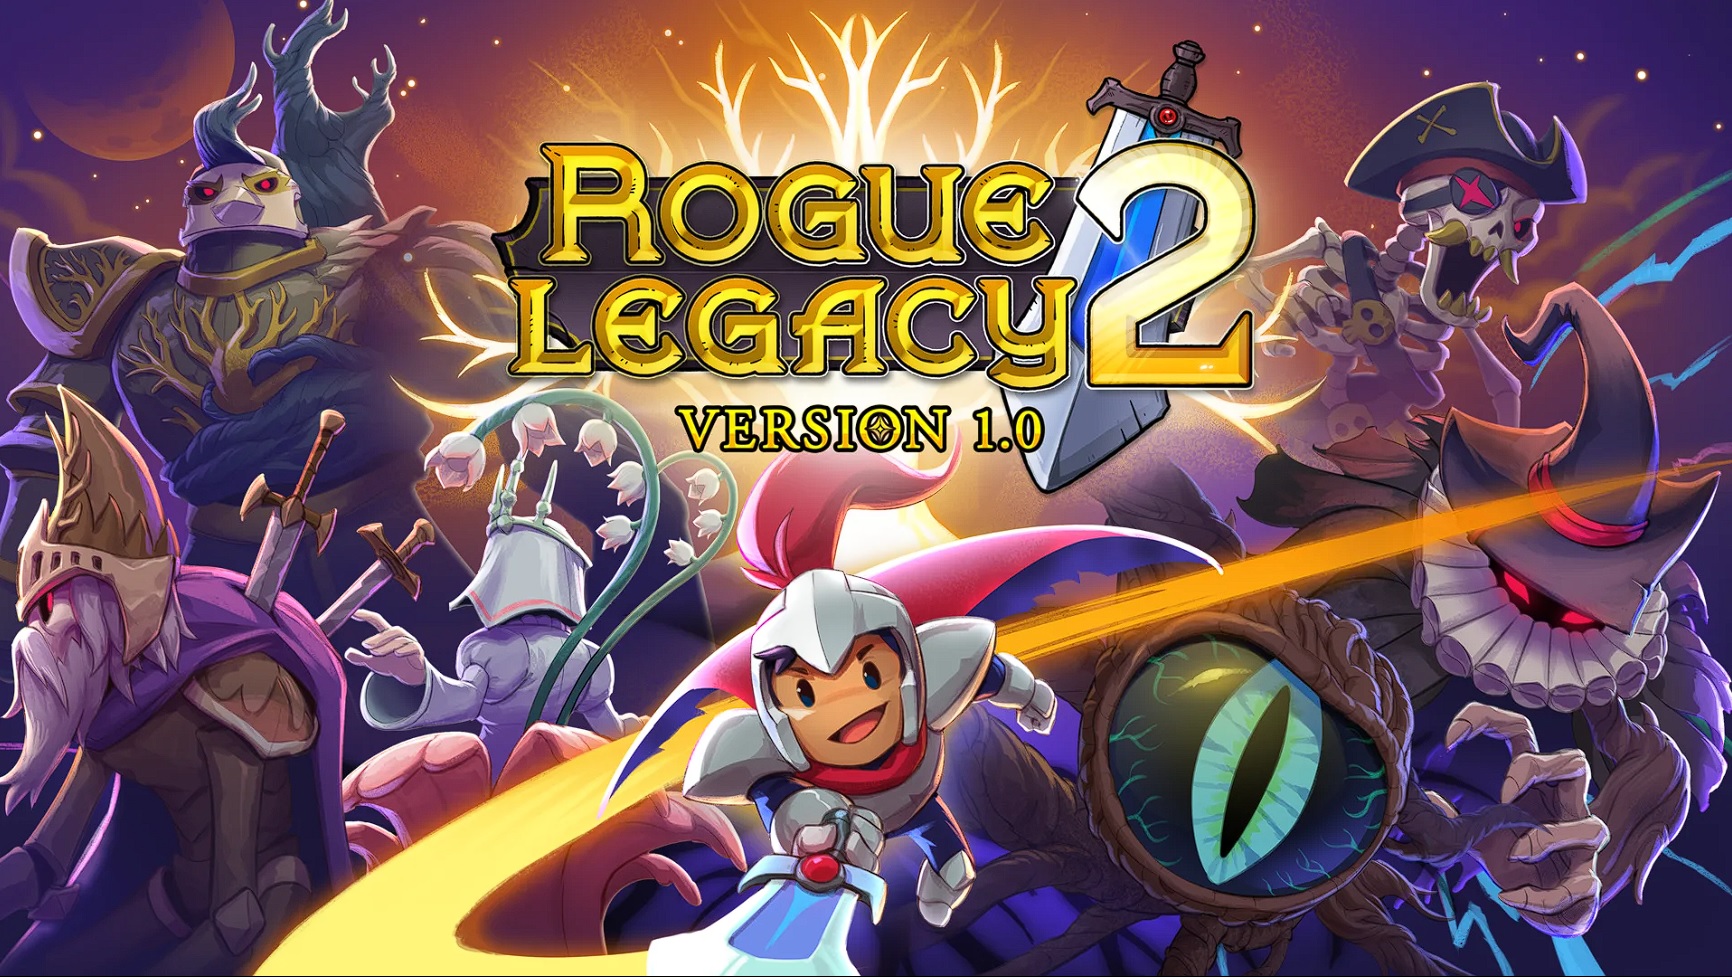 Rogue Legacy 2 officially launches after 2 years in Early Access